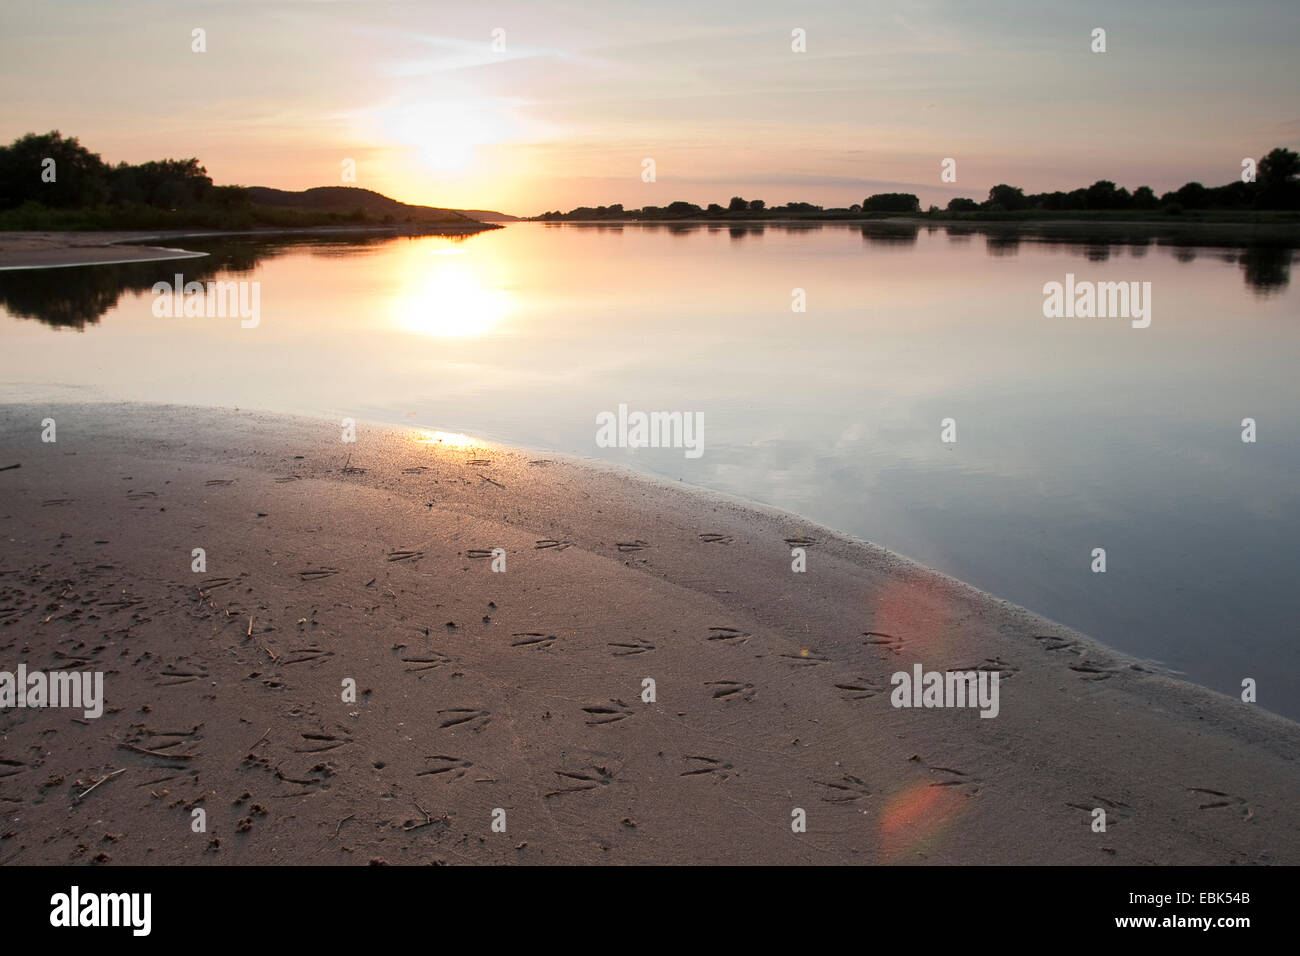 sunset over river Elbe with a duck track in the shore mud, Germany Stock Photo